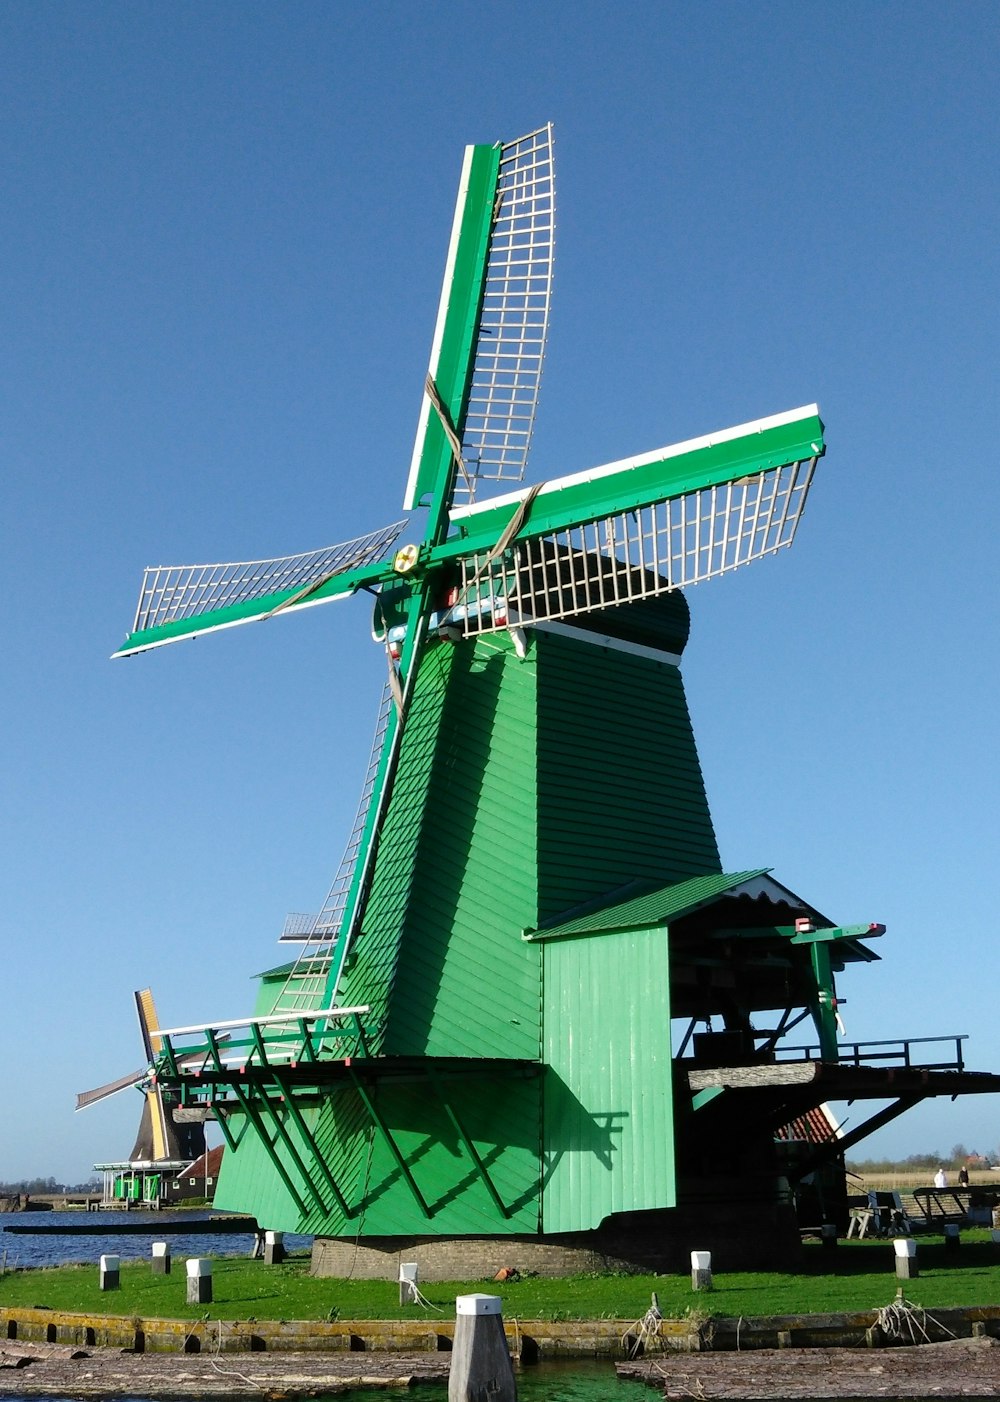 a green windmill sitting next to a body of water